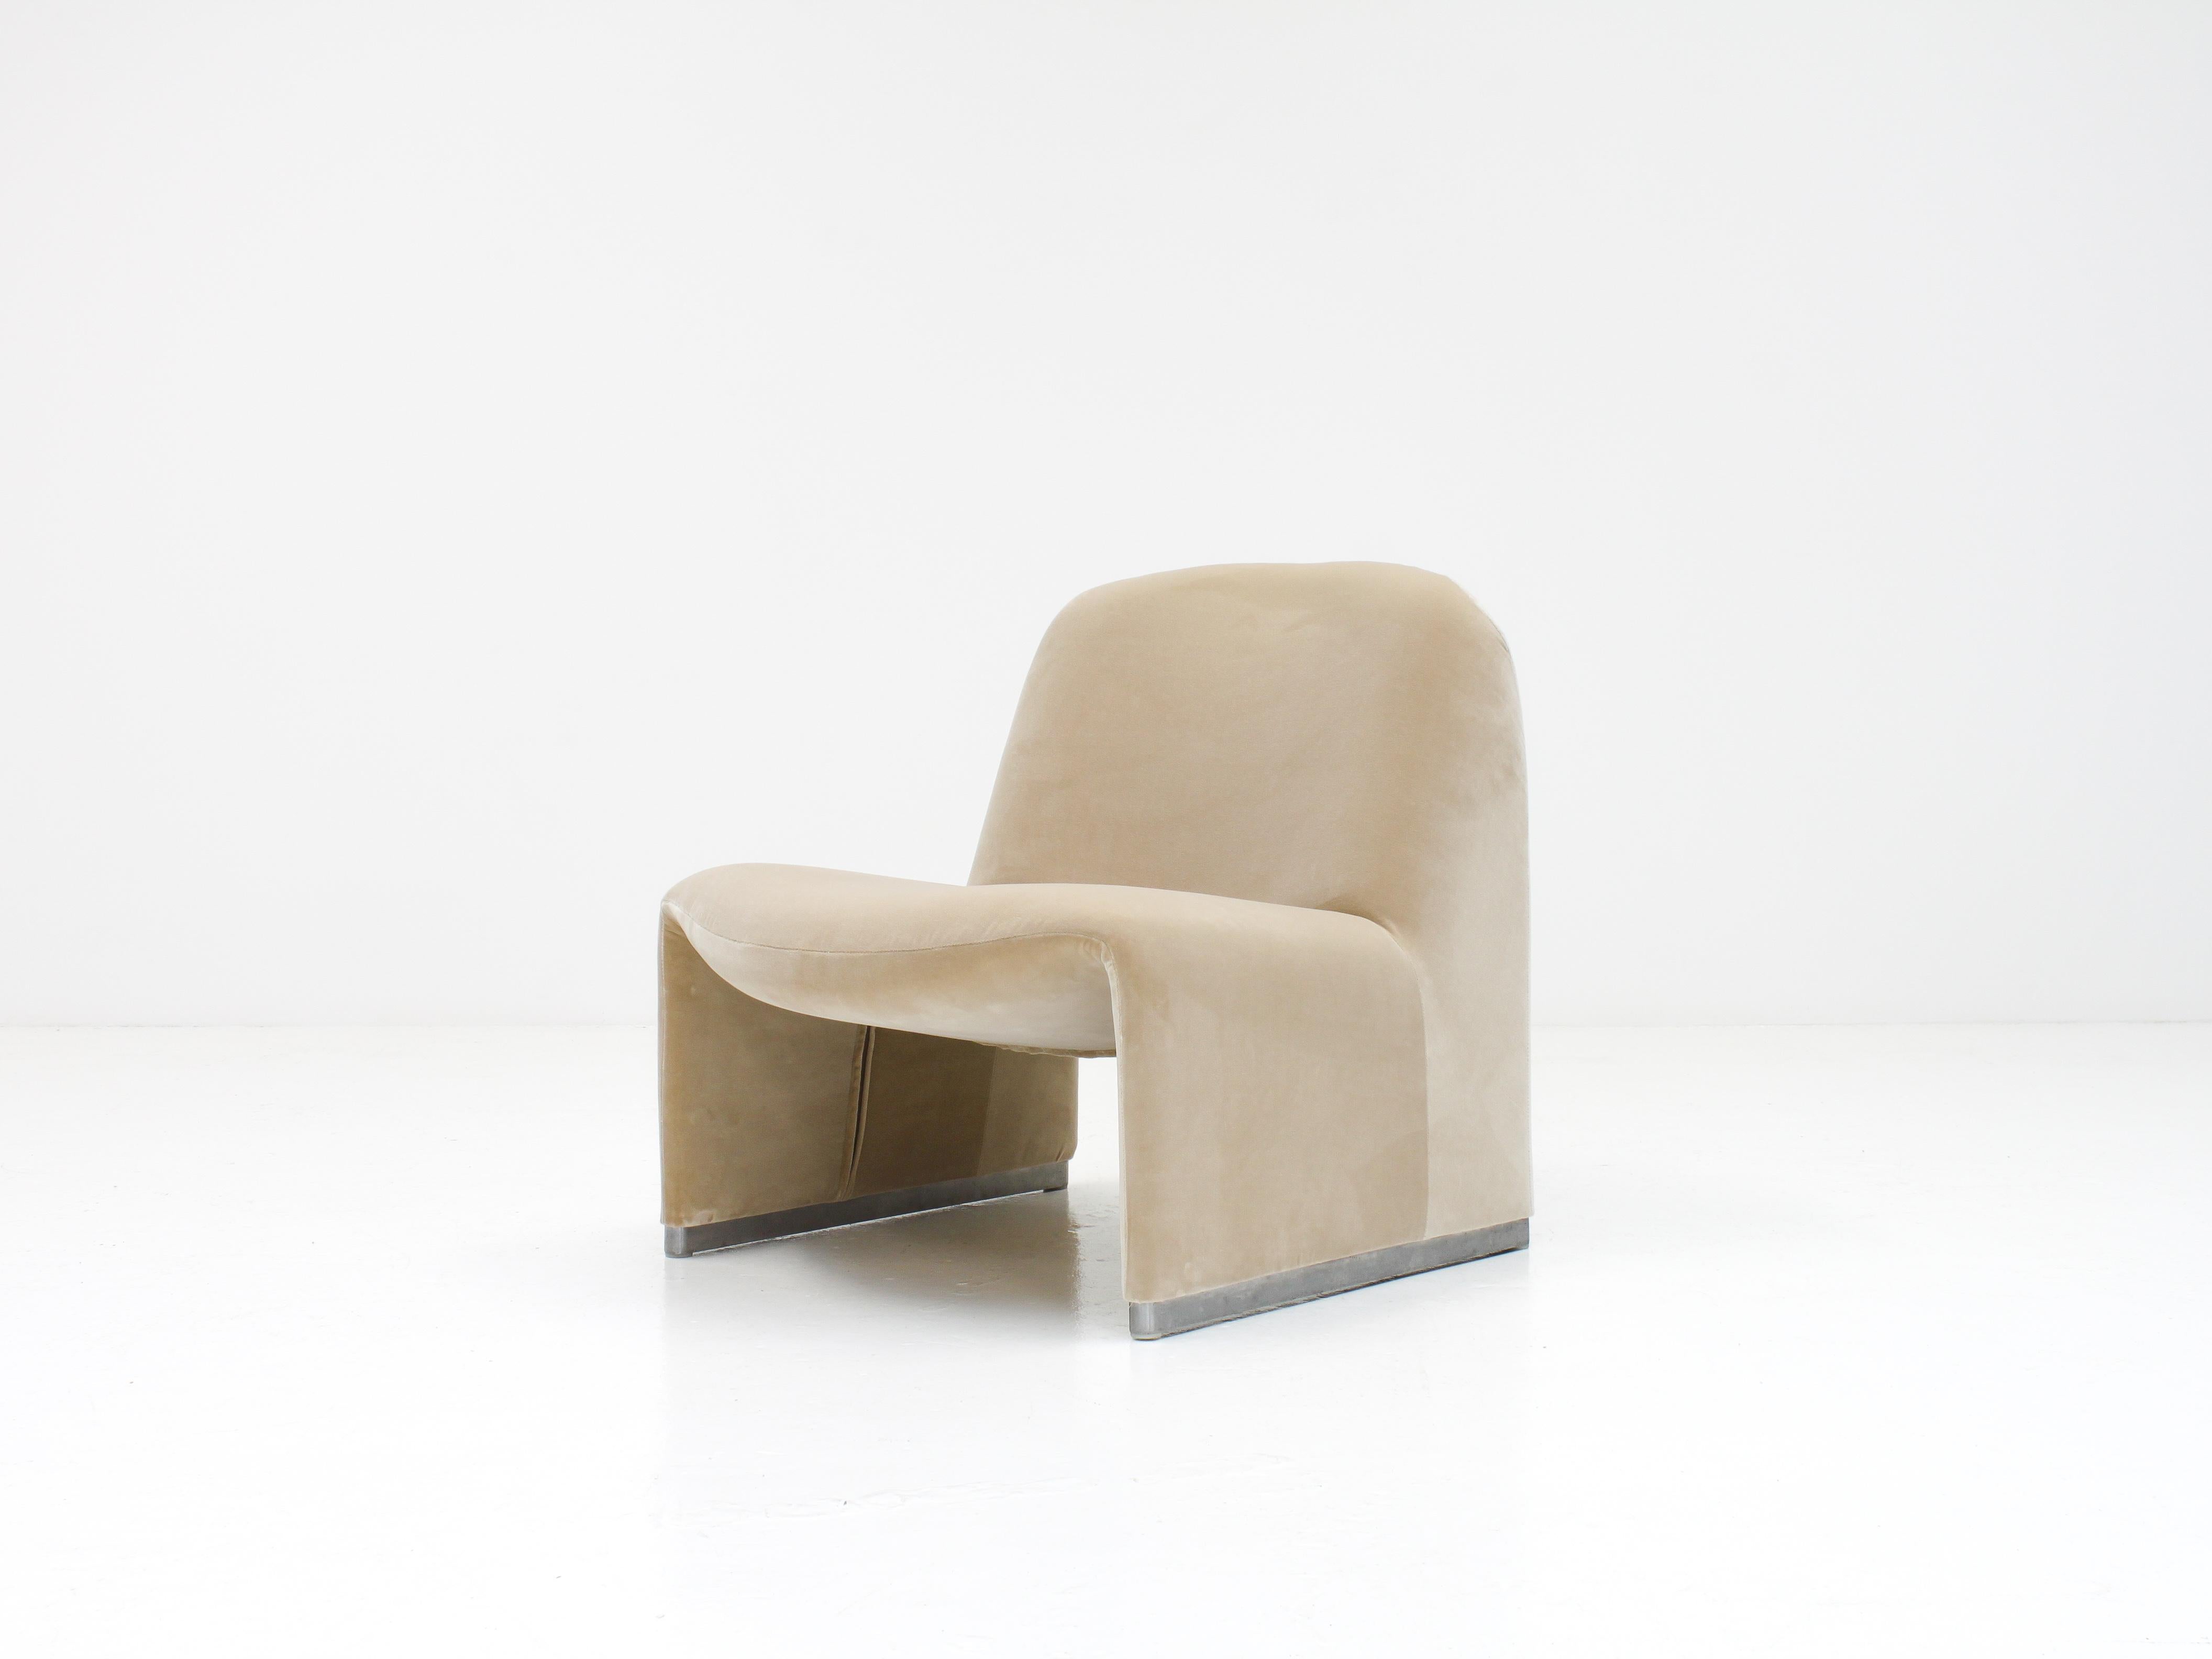 A single Giancarlo Piretti “Alky” chair newly upholstered in Designers Guild linen colored cotton velvet. 

Manufactured by Artifort in the 1970s.

The organic shape offers a minimal appearance but also comfort.

In very nice condition with